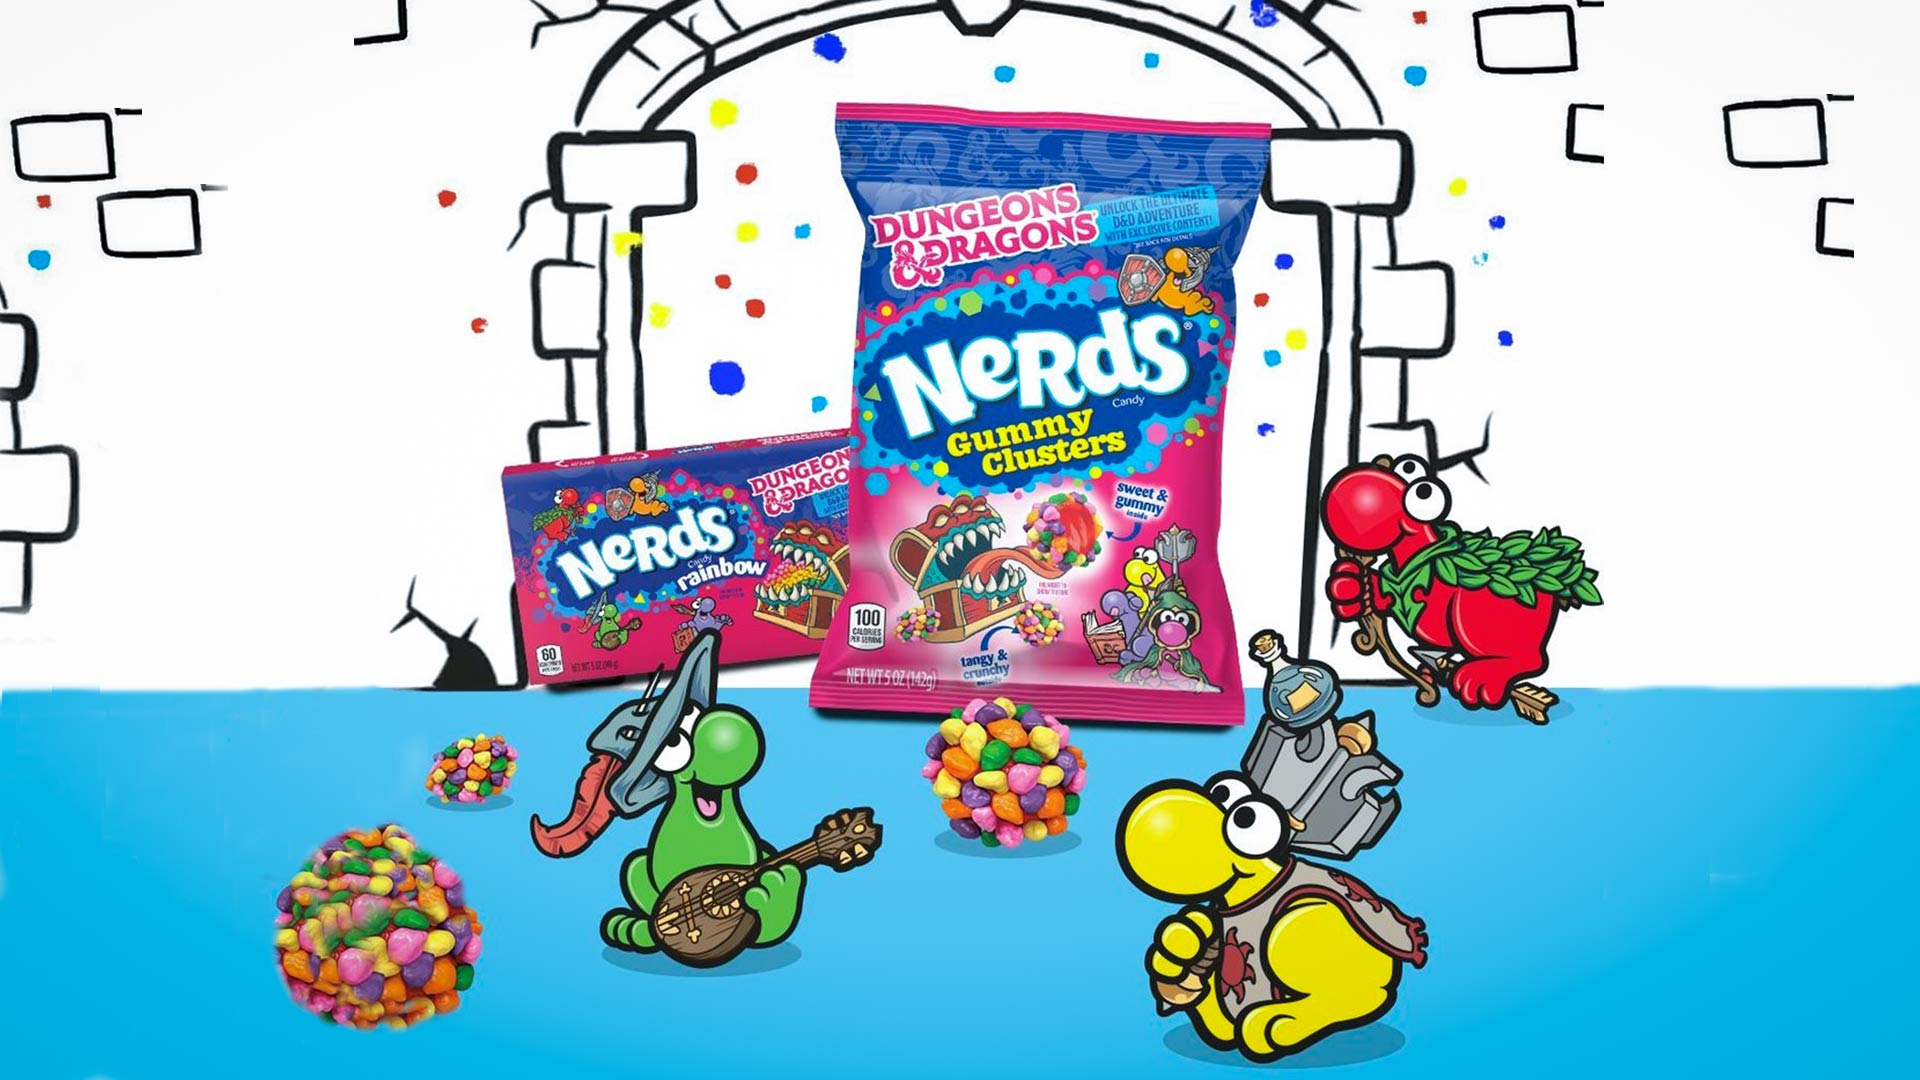 Nerds candy Flavors & Nutritional Facts